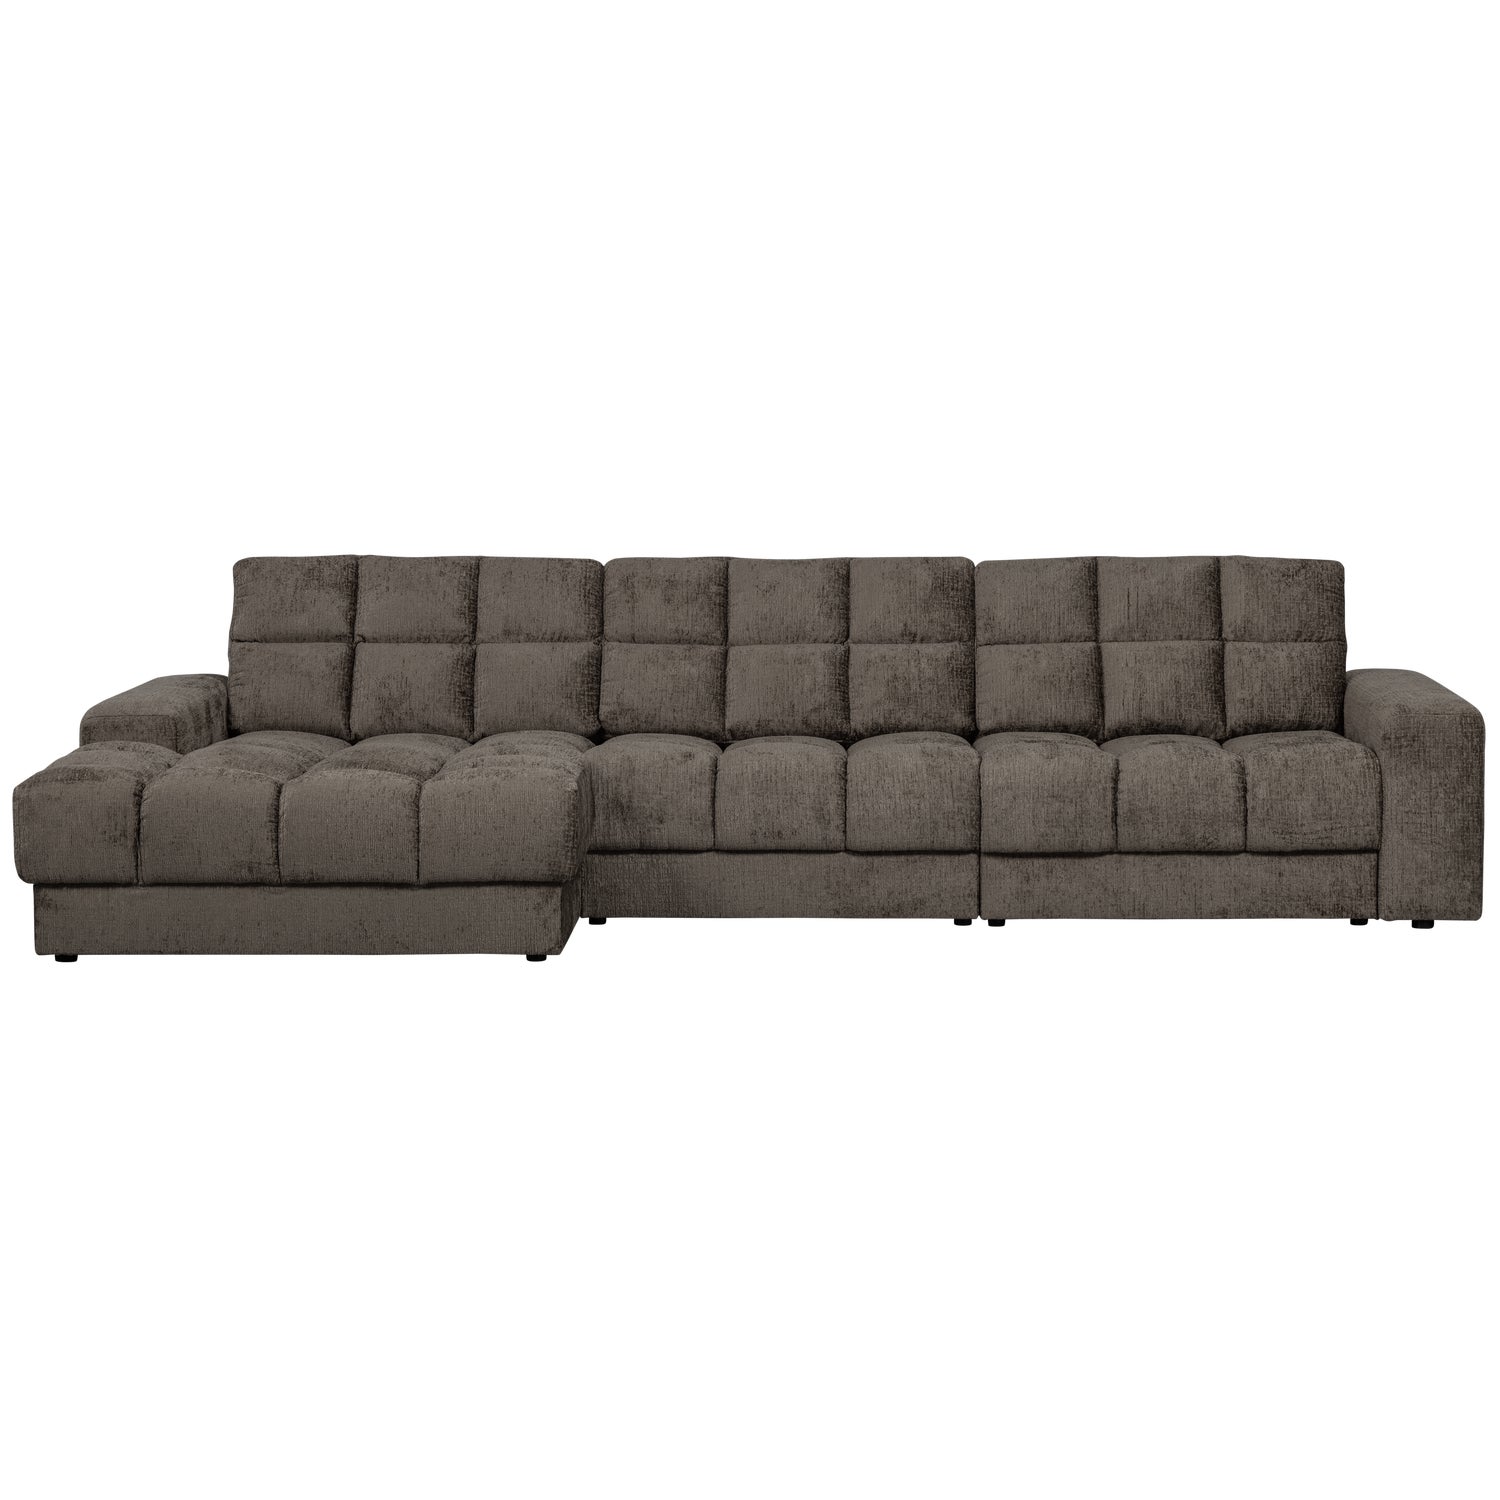 379012-MO-01_VS_WE_Second_date_chaise_longue_links_structure_velvet_mountain.png?auto=webp&format=png&width=1500&height=1500